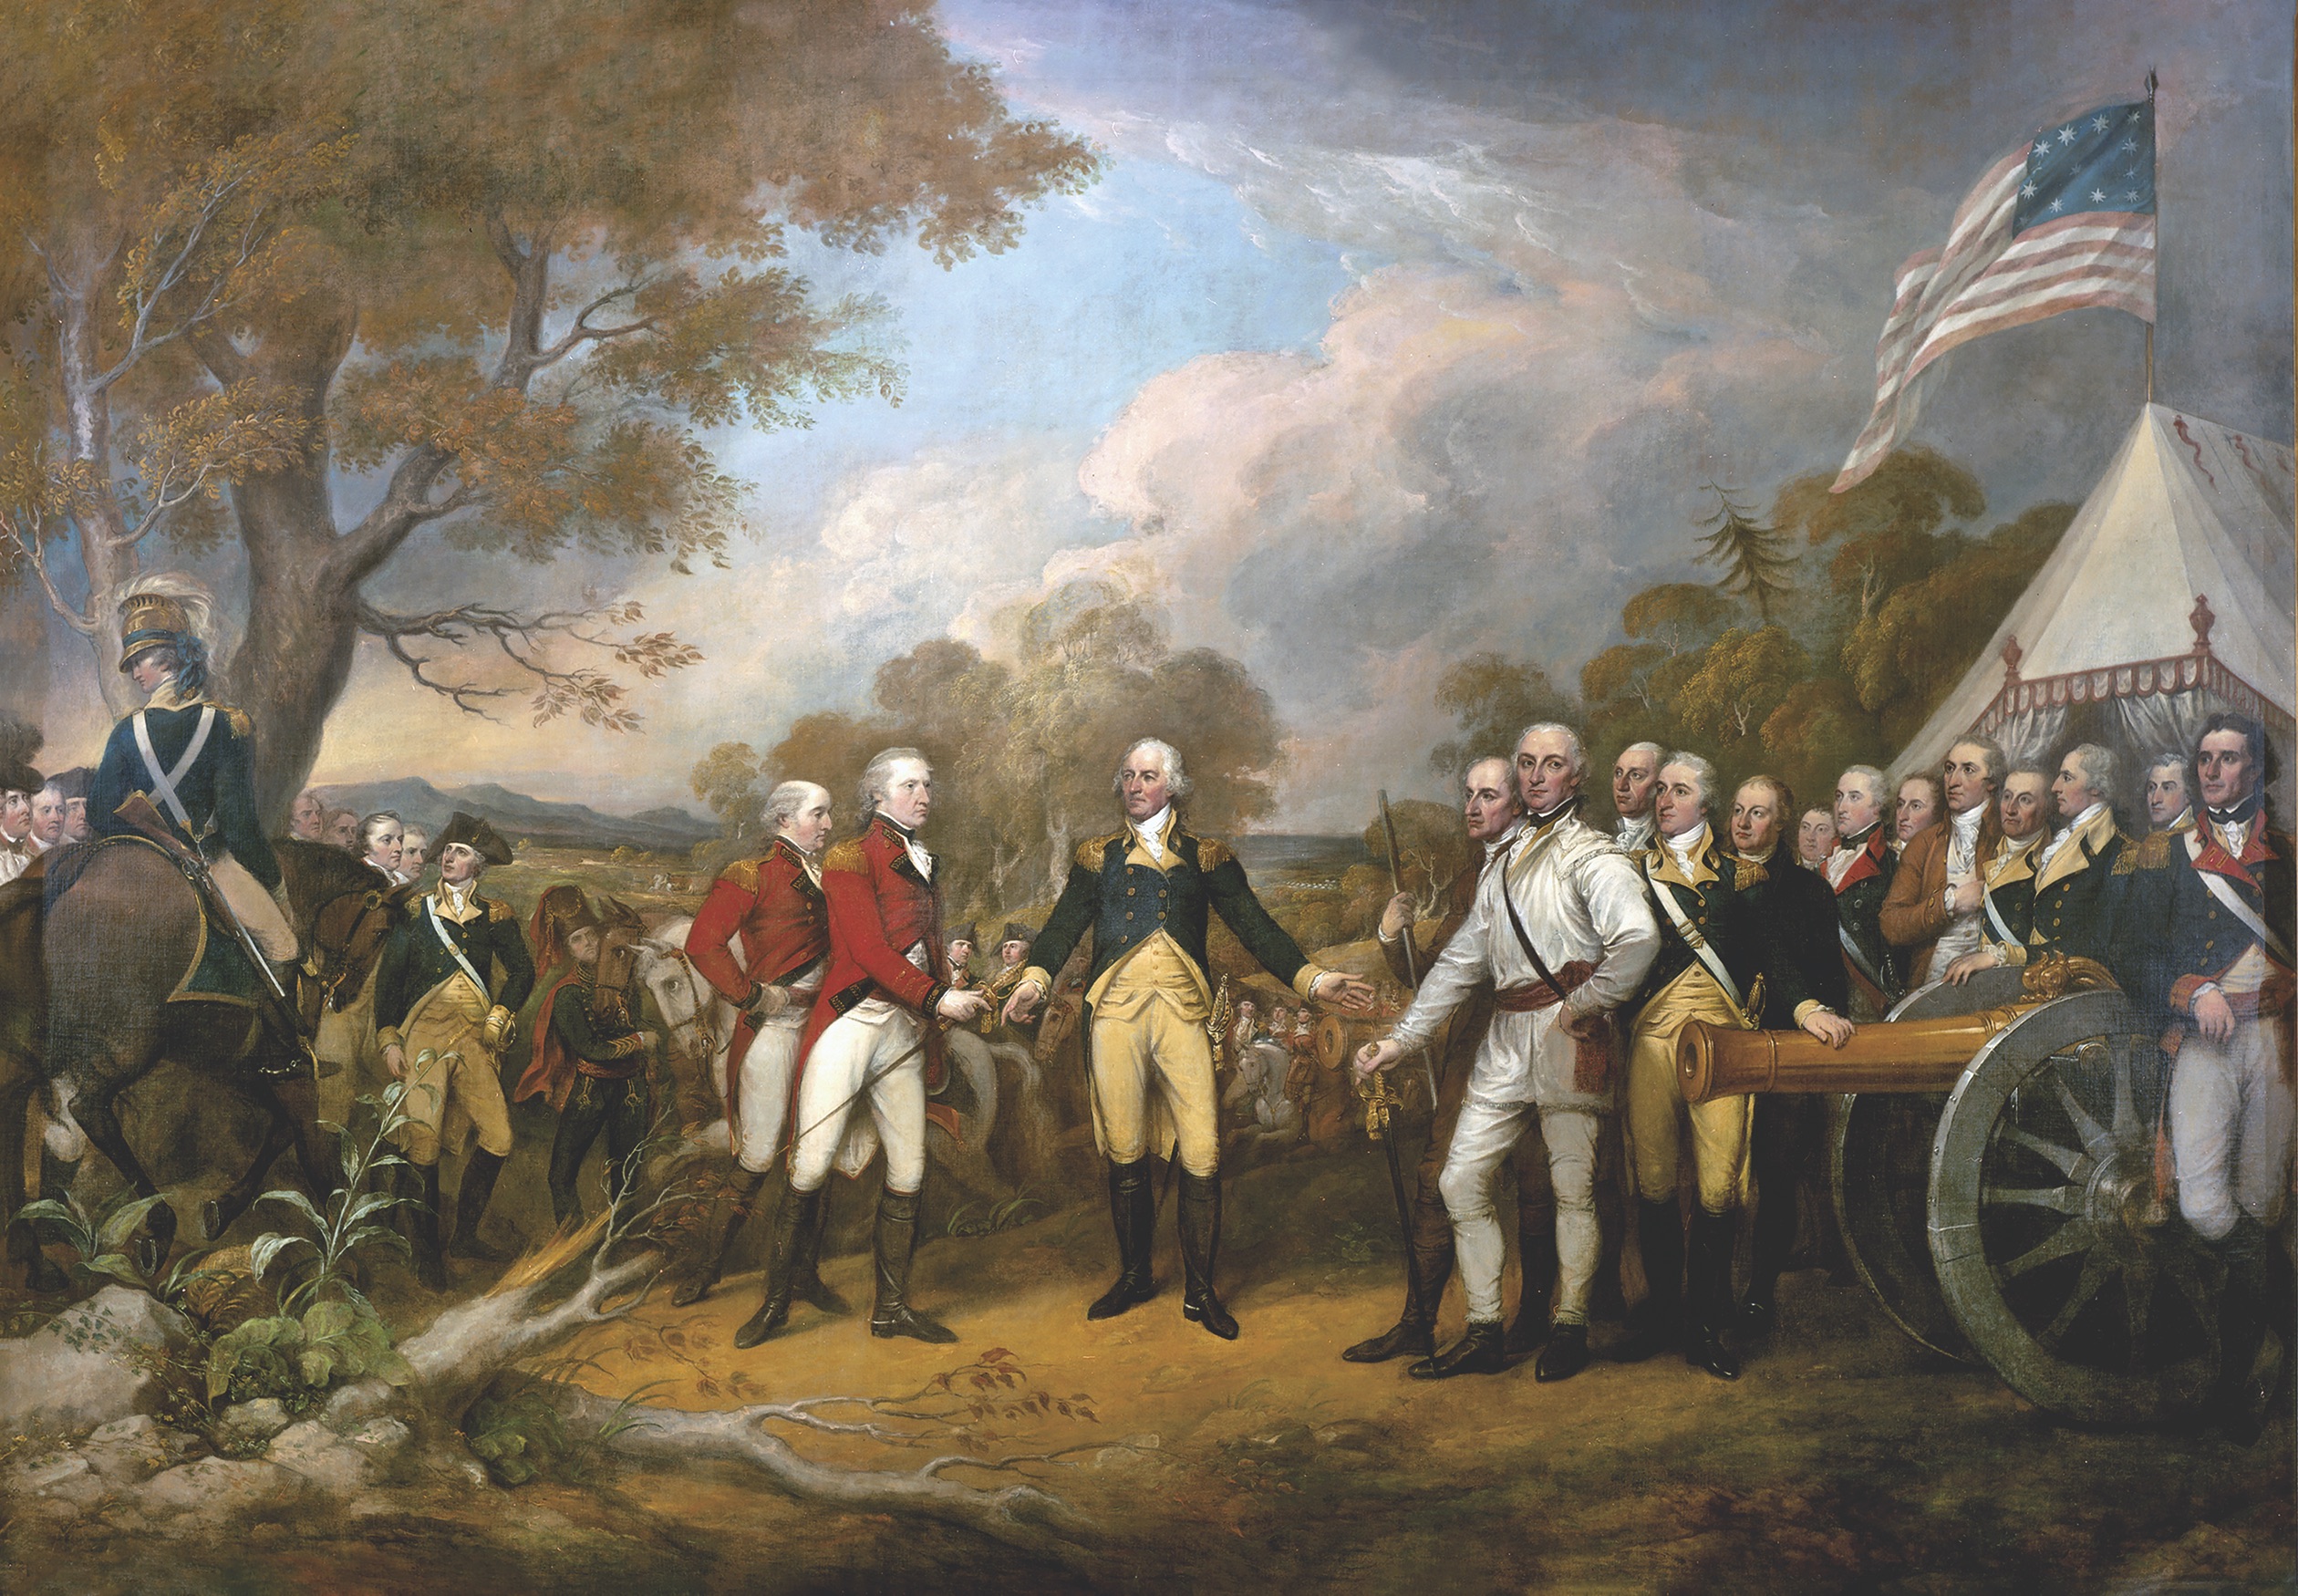 On October 17, 1777, following his demoralizing loss to the Americans at the Battle of Saratoga, Burgoyne surrenders his remaining men and hands his sword to Major General Horatio Gates. (U.S. Architect of the Capitol)